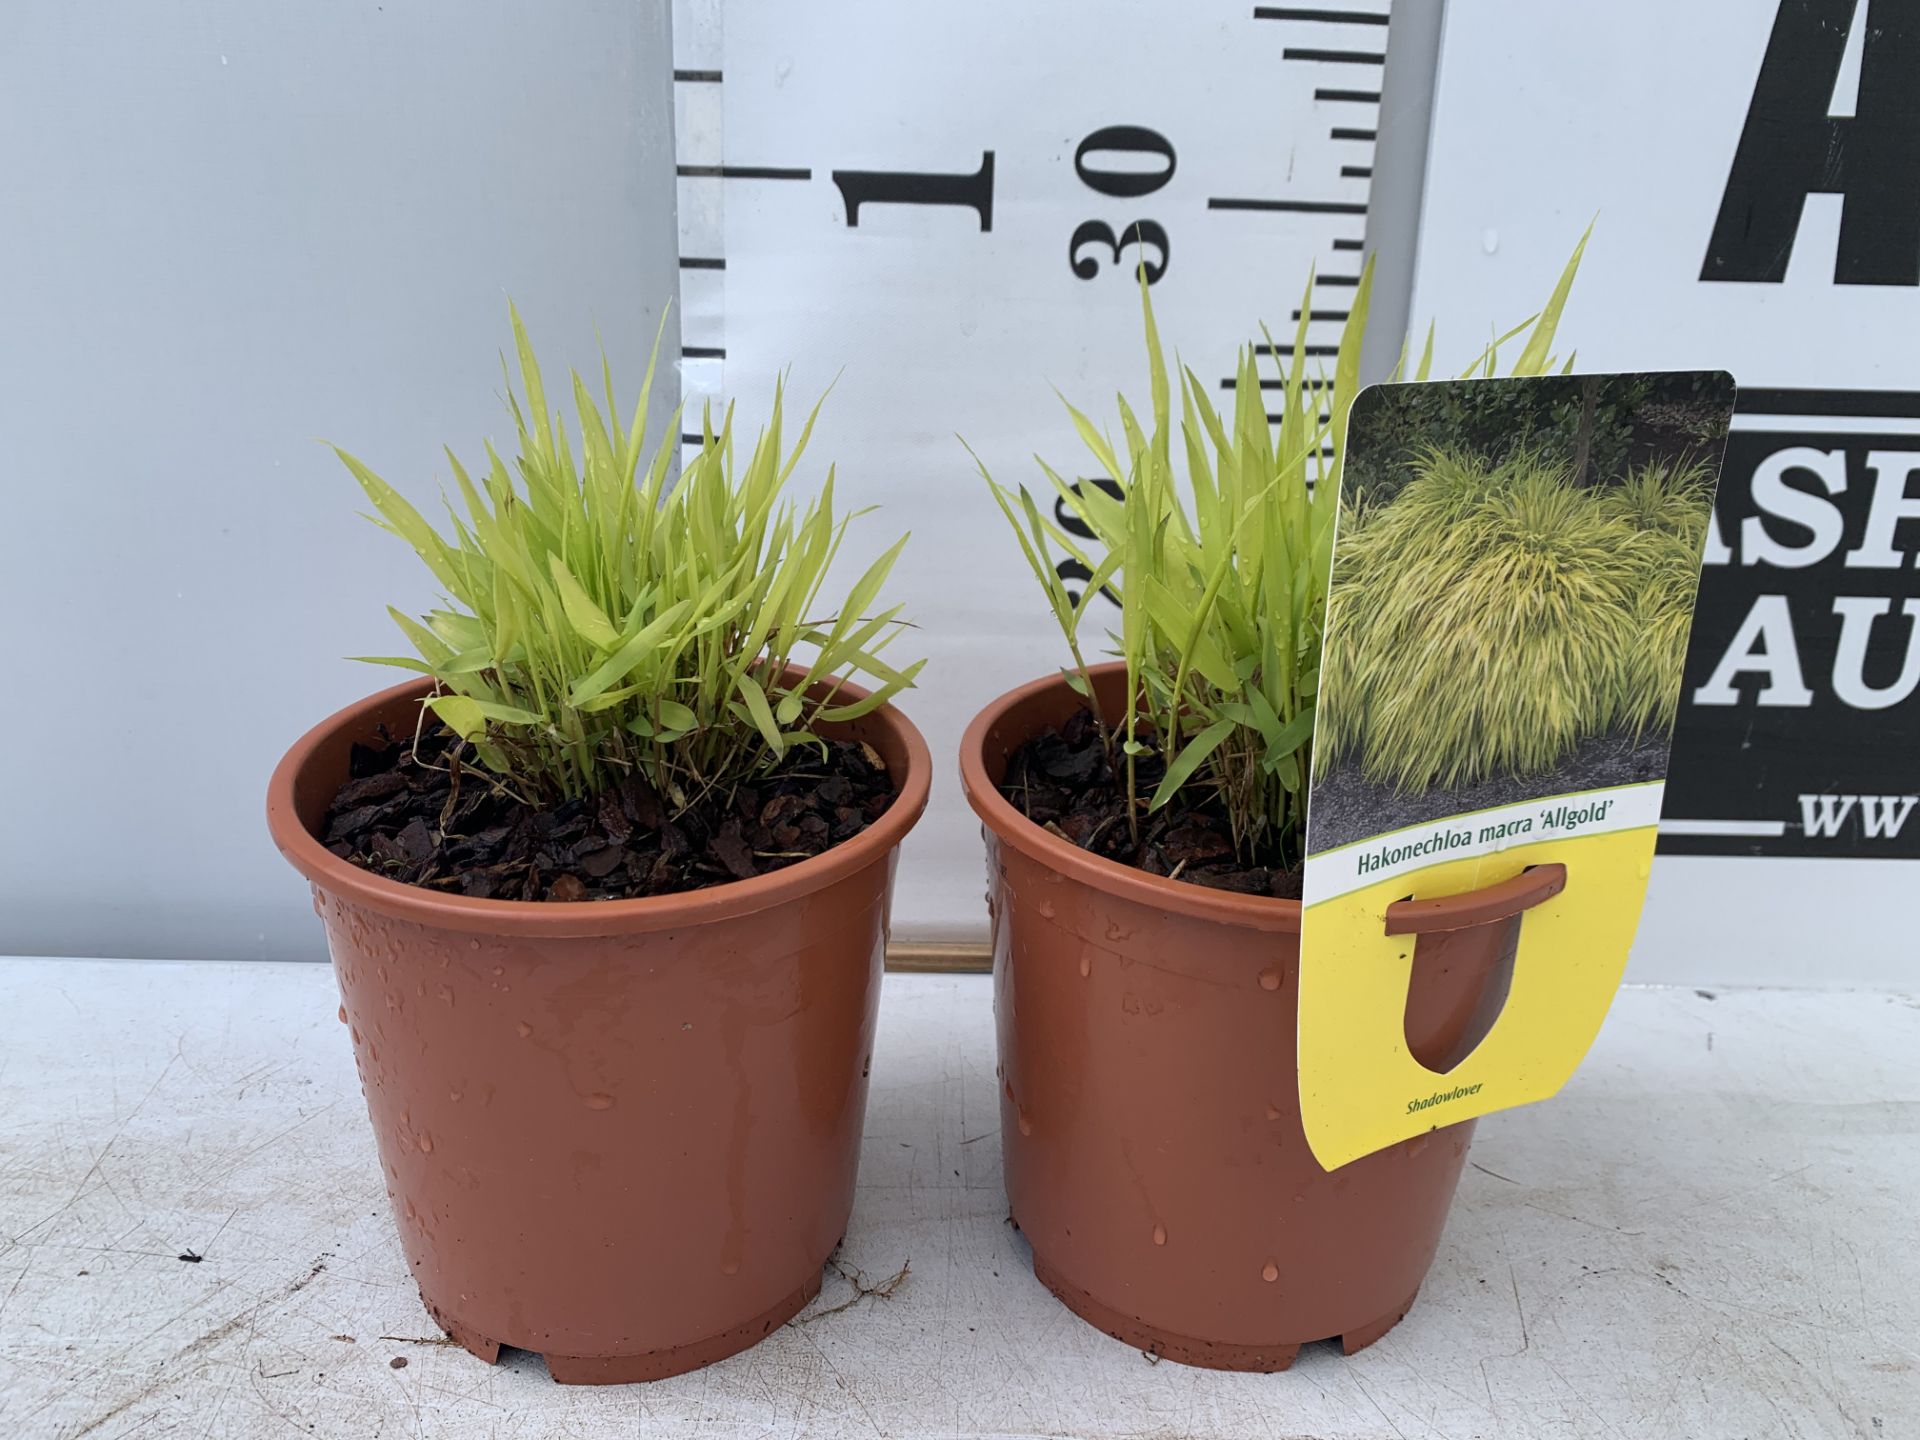 TWO ORNAMENTAL GRASSES HAKONECHLOA MACRA 'ALLGOLD' IN 1 LTR POTS PLUS VAT TO BE SOLD FOR THE TWO